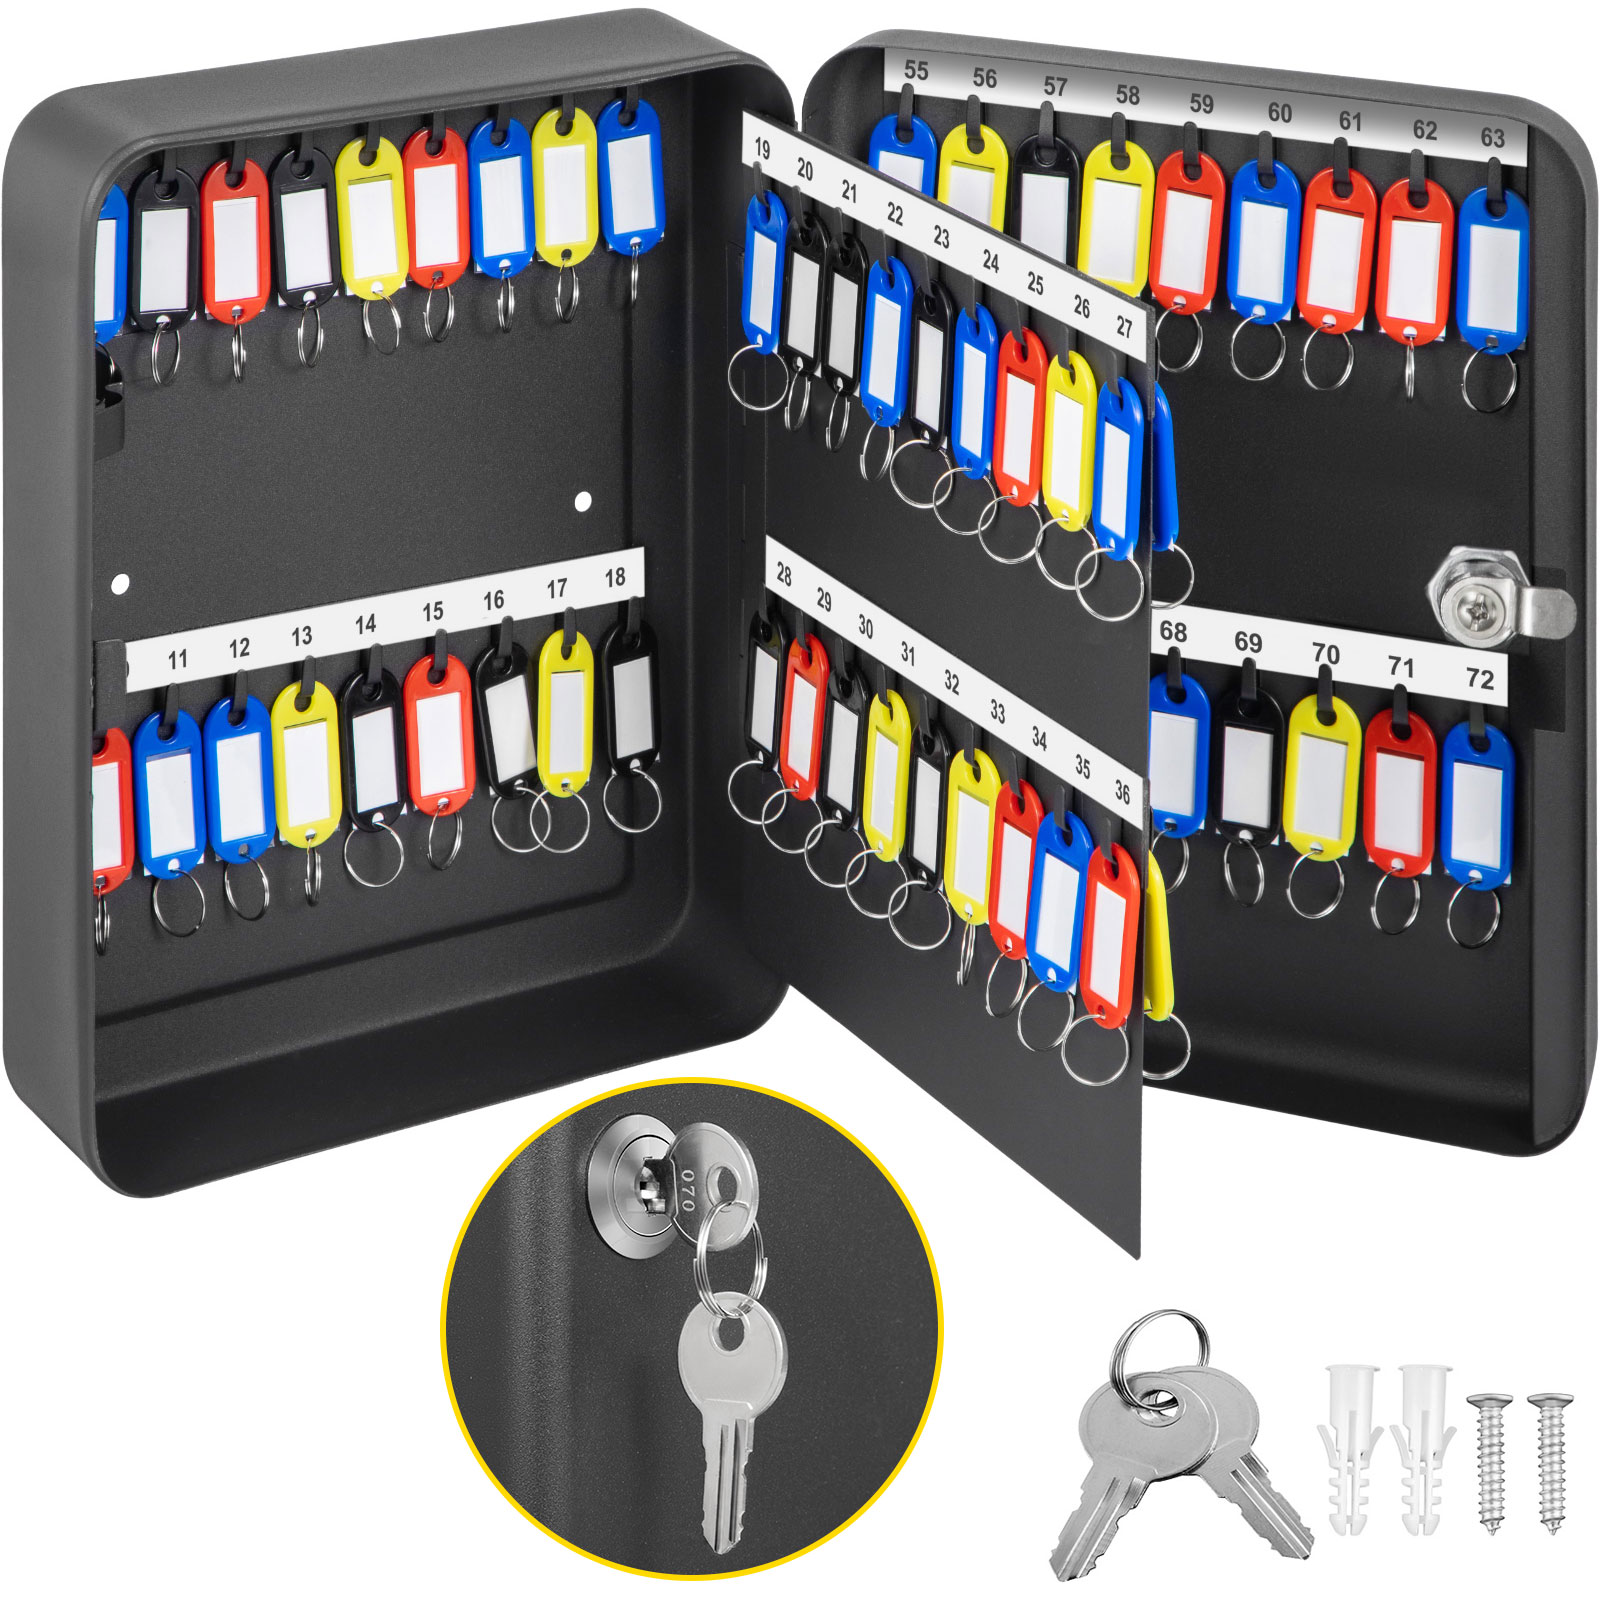 Safe Box,4 Lock Systems,Wall Mounted Design